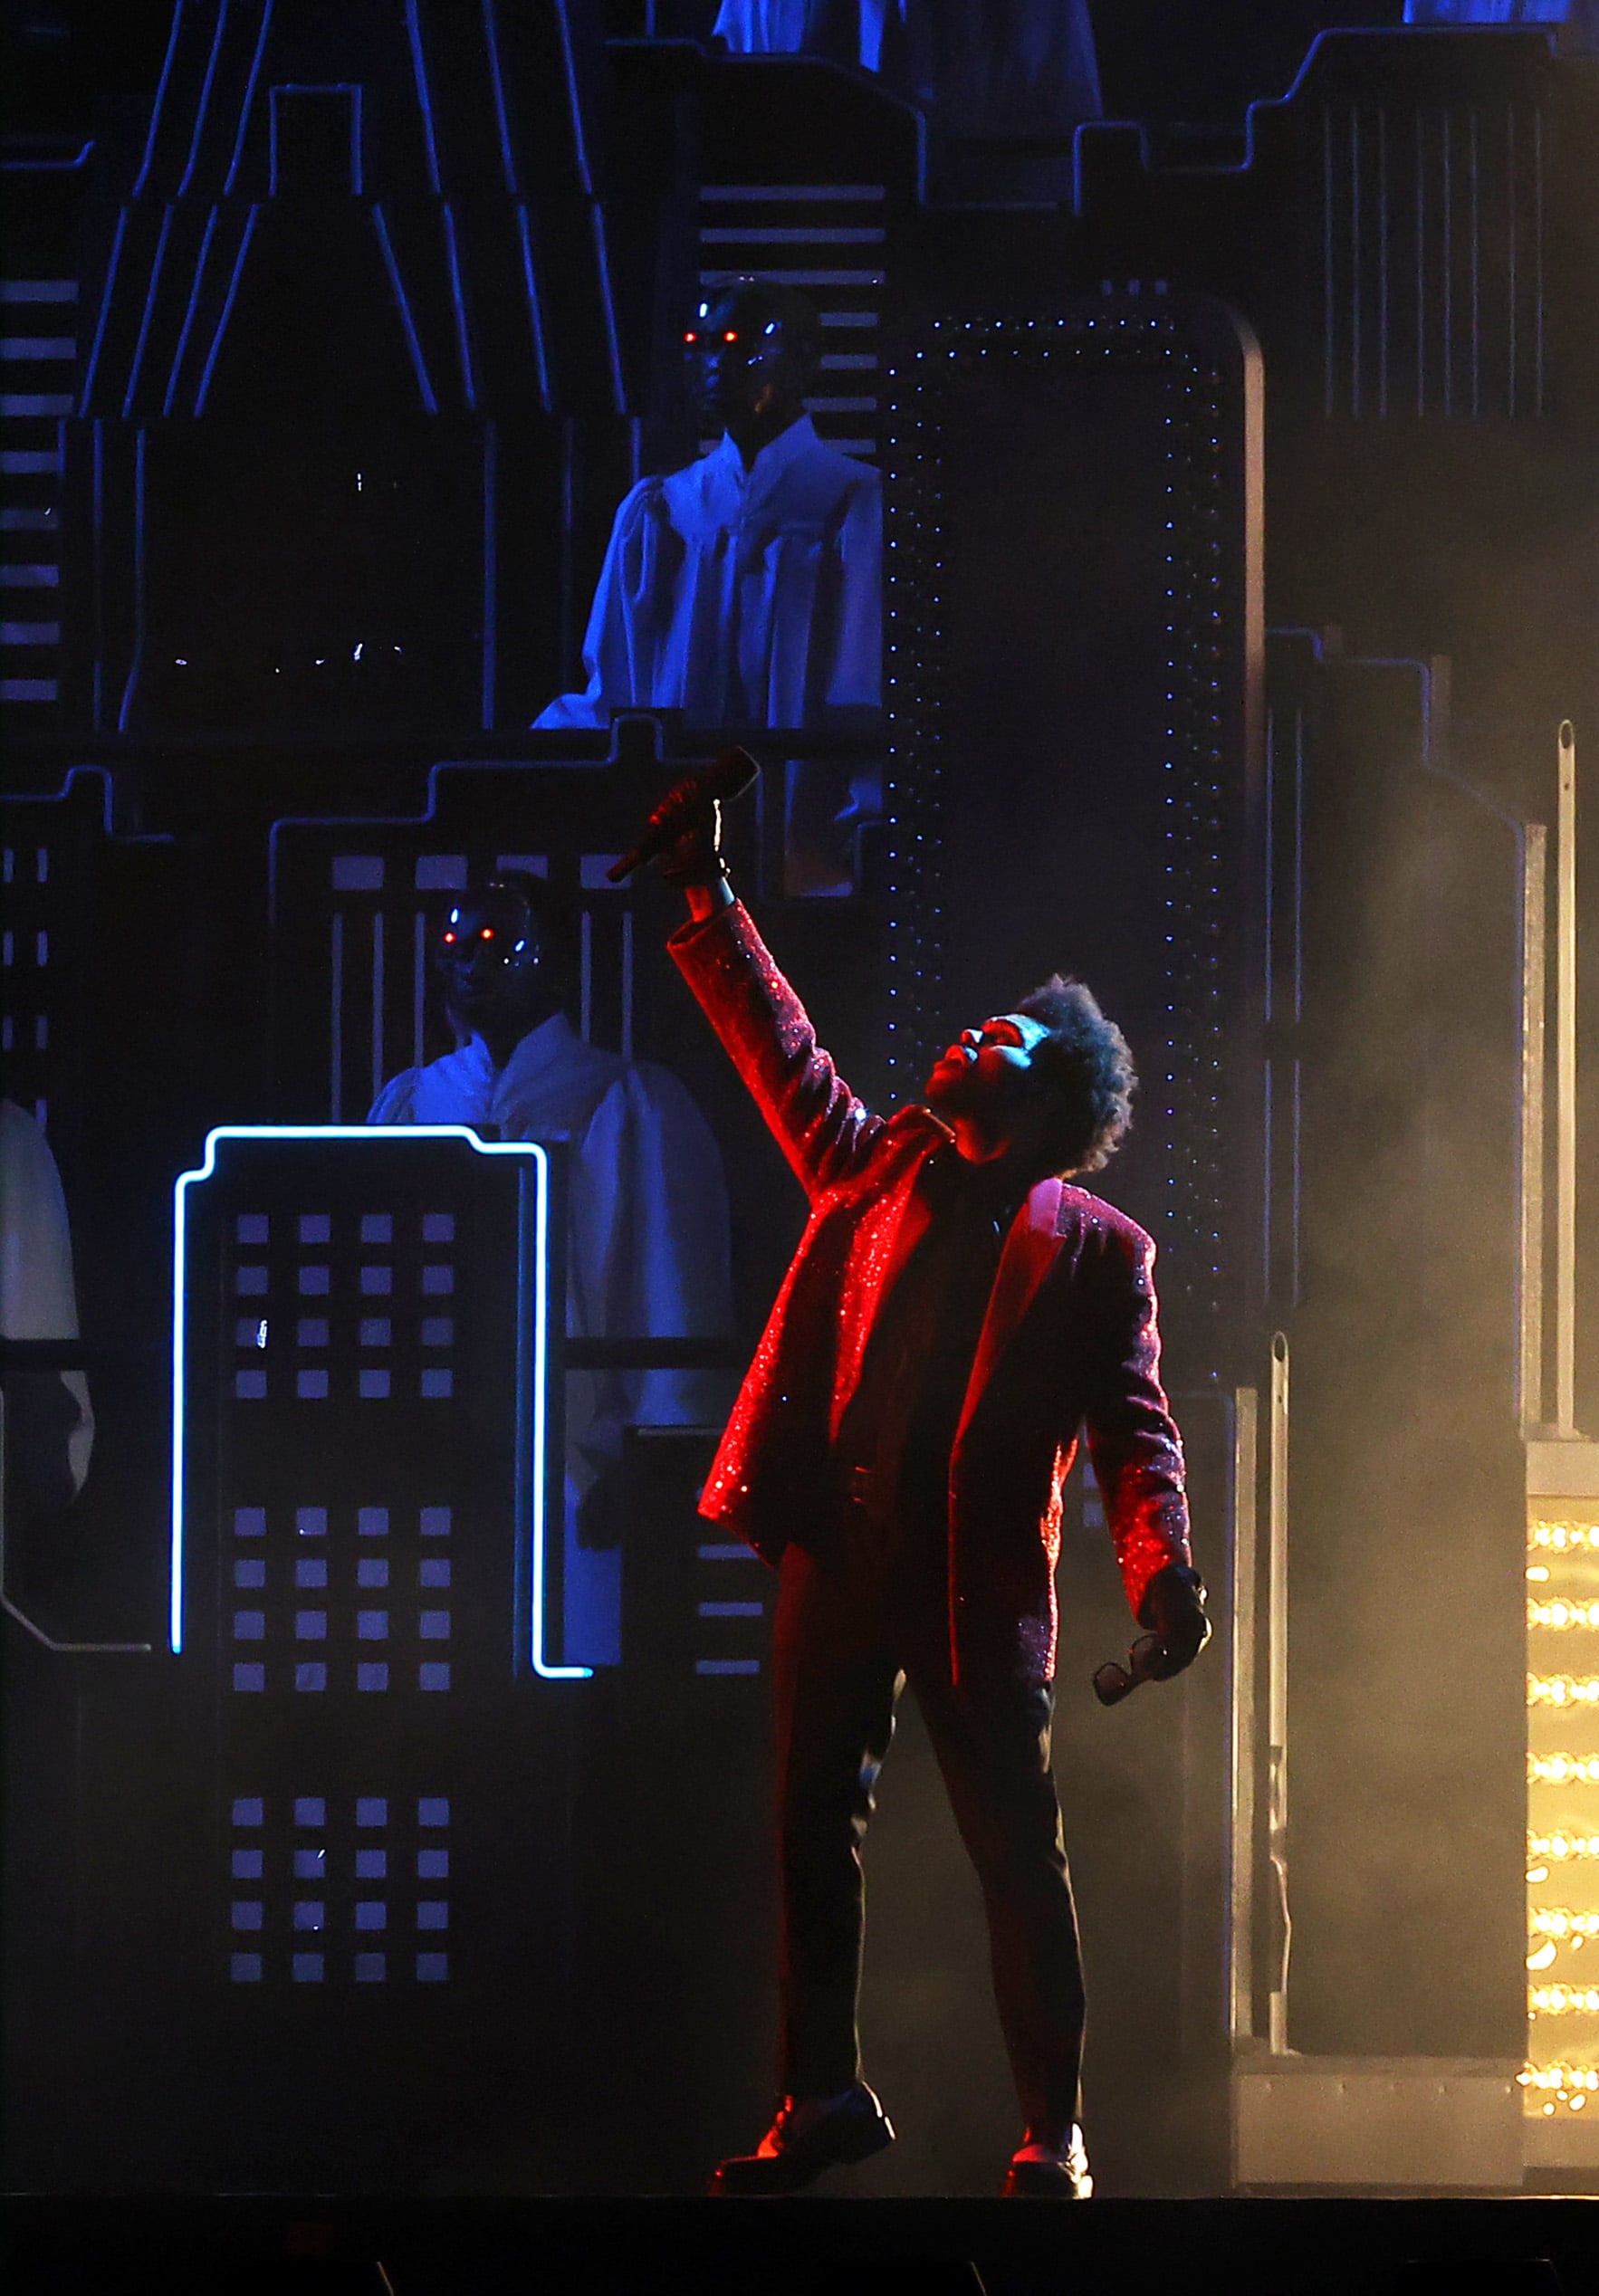 The Weeknd Wore His Red Suit—Again—to the Super Bowl